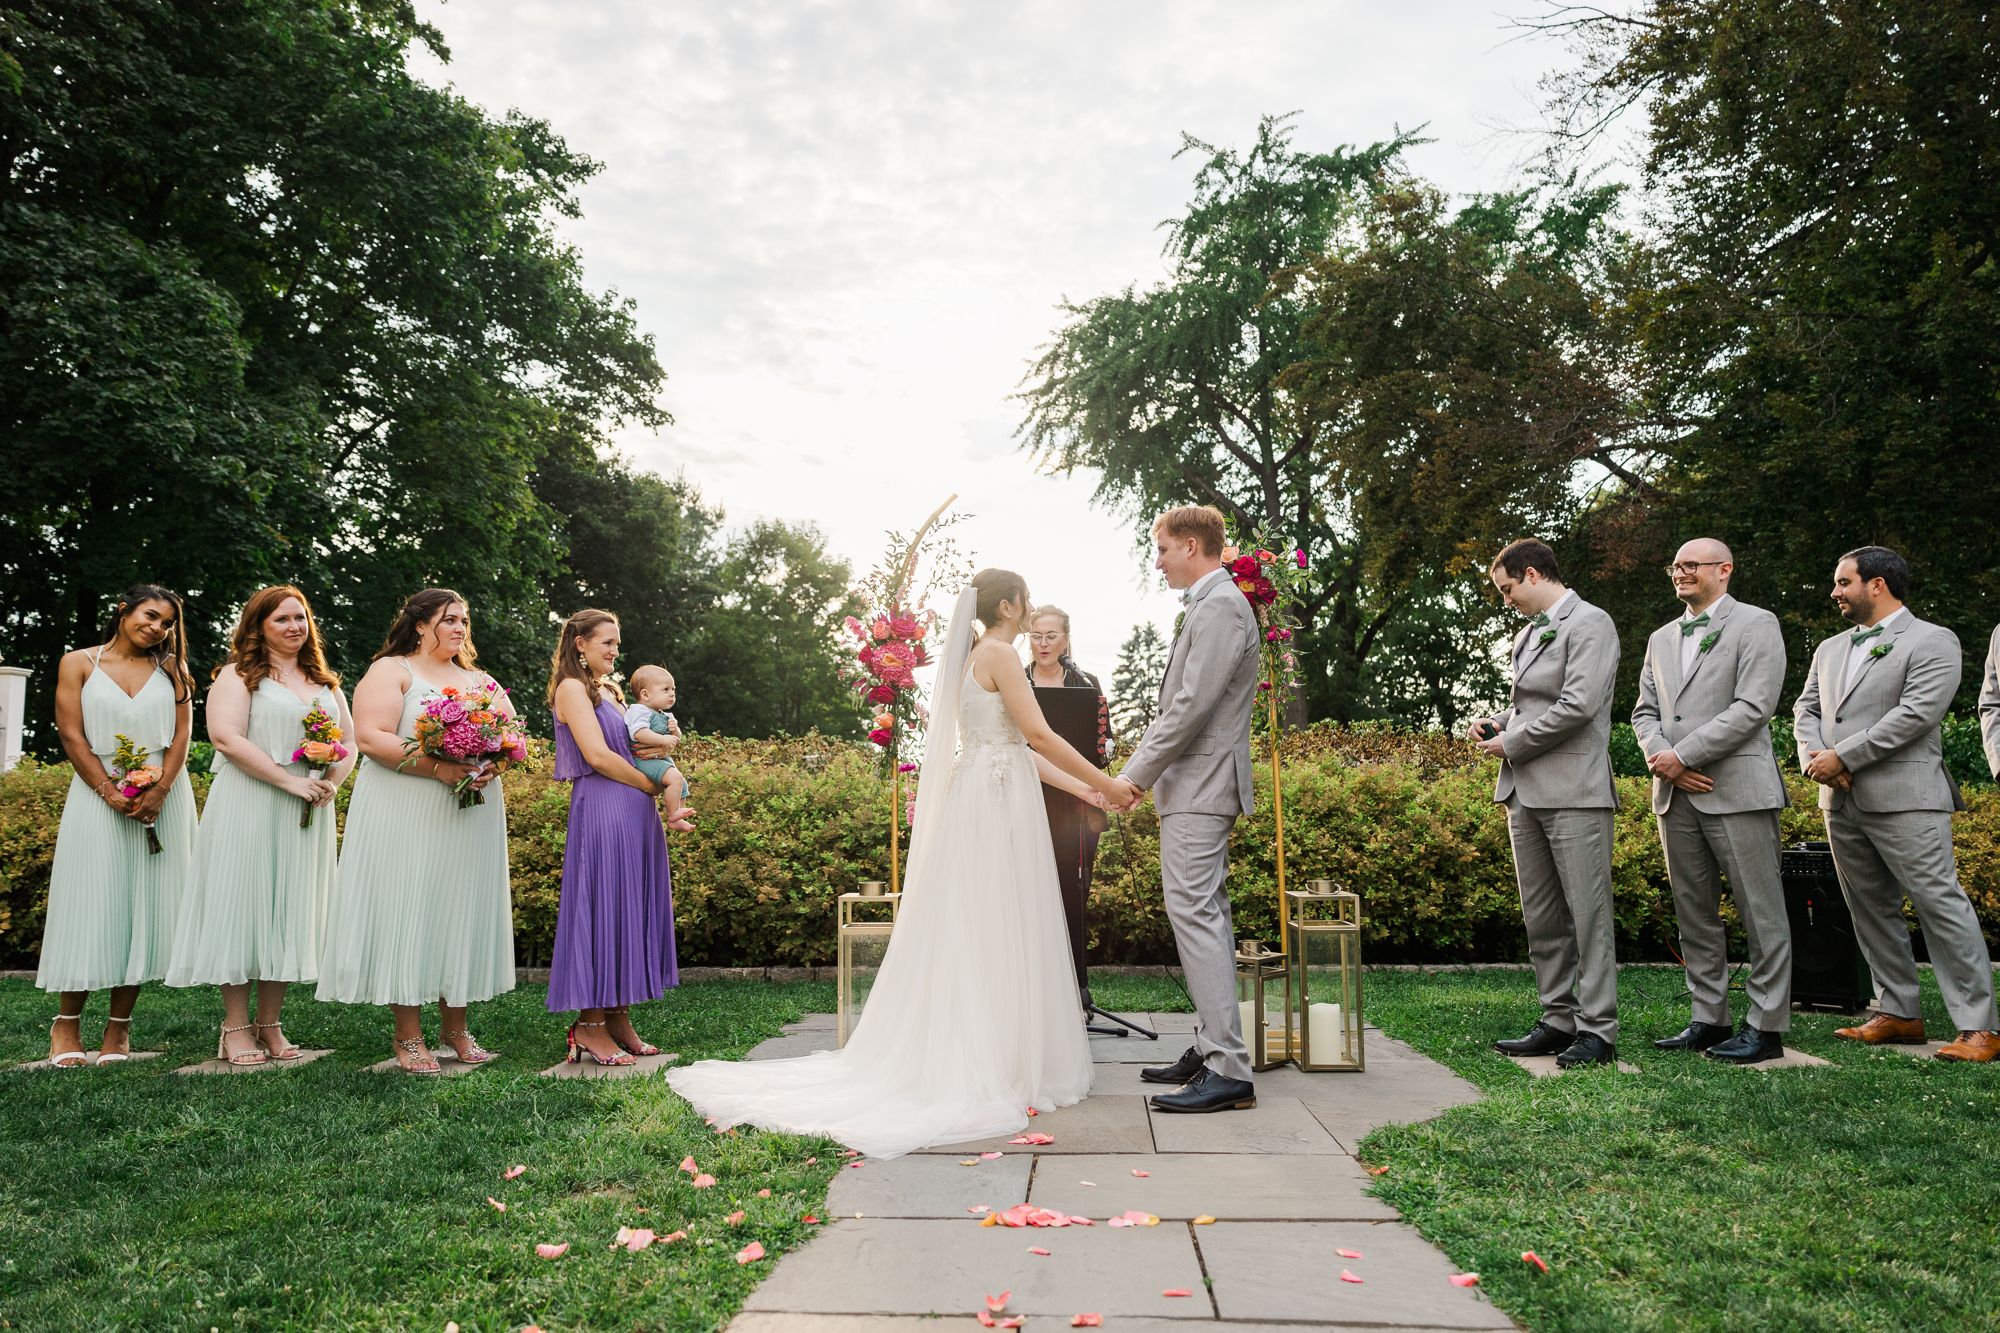 Joyous Wedding at Briarcliff Manor in Summertime